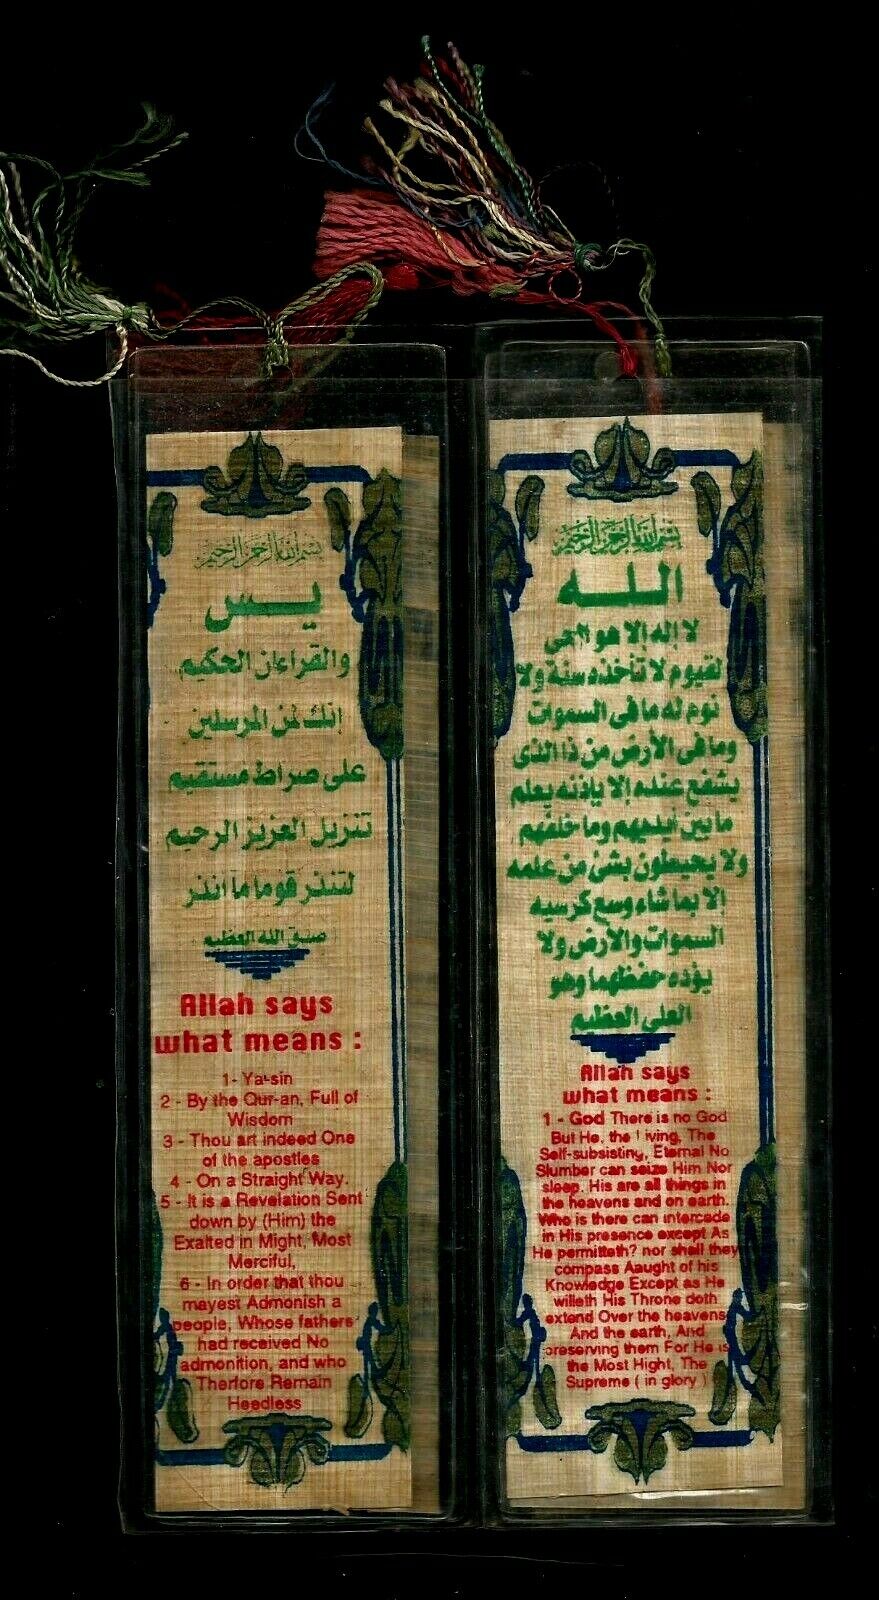 EGYPT ISLAMIC COLLECTABLES 2 HOLY QURAN PRINTED/PAPYRUS PAPERS W+ TRANSLATION #4